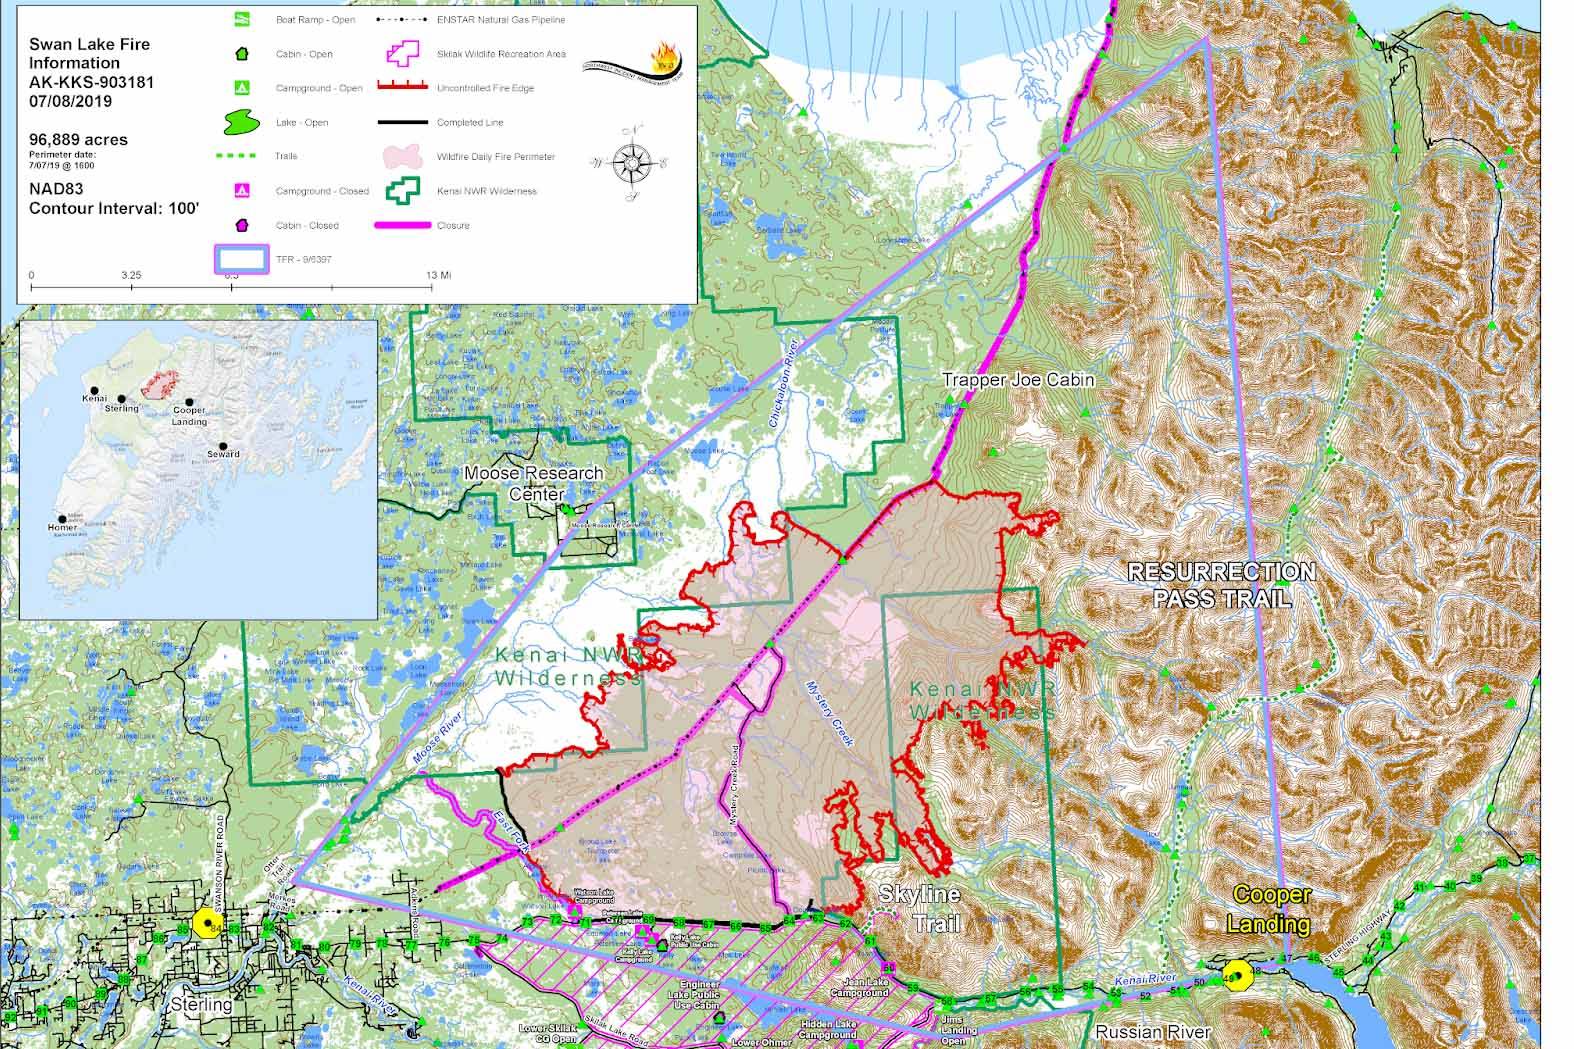 A map shows the extent of the Swan Lake Fire as of Monday, July 8, 2019, which has grown to 96,889 acres on the Kenai Peninsula. (Courtesy Northwest Incident Management Team)